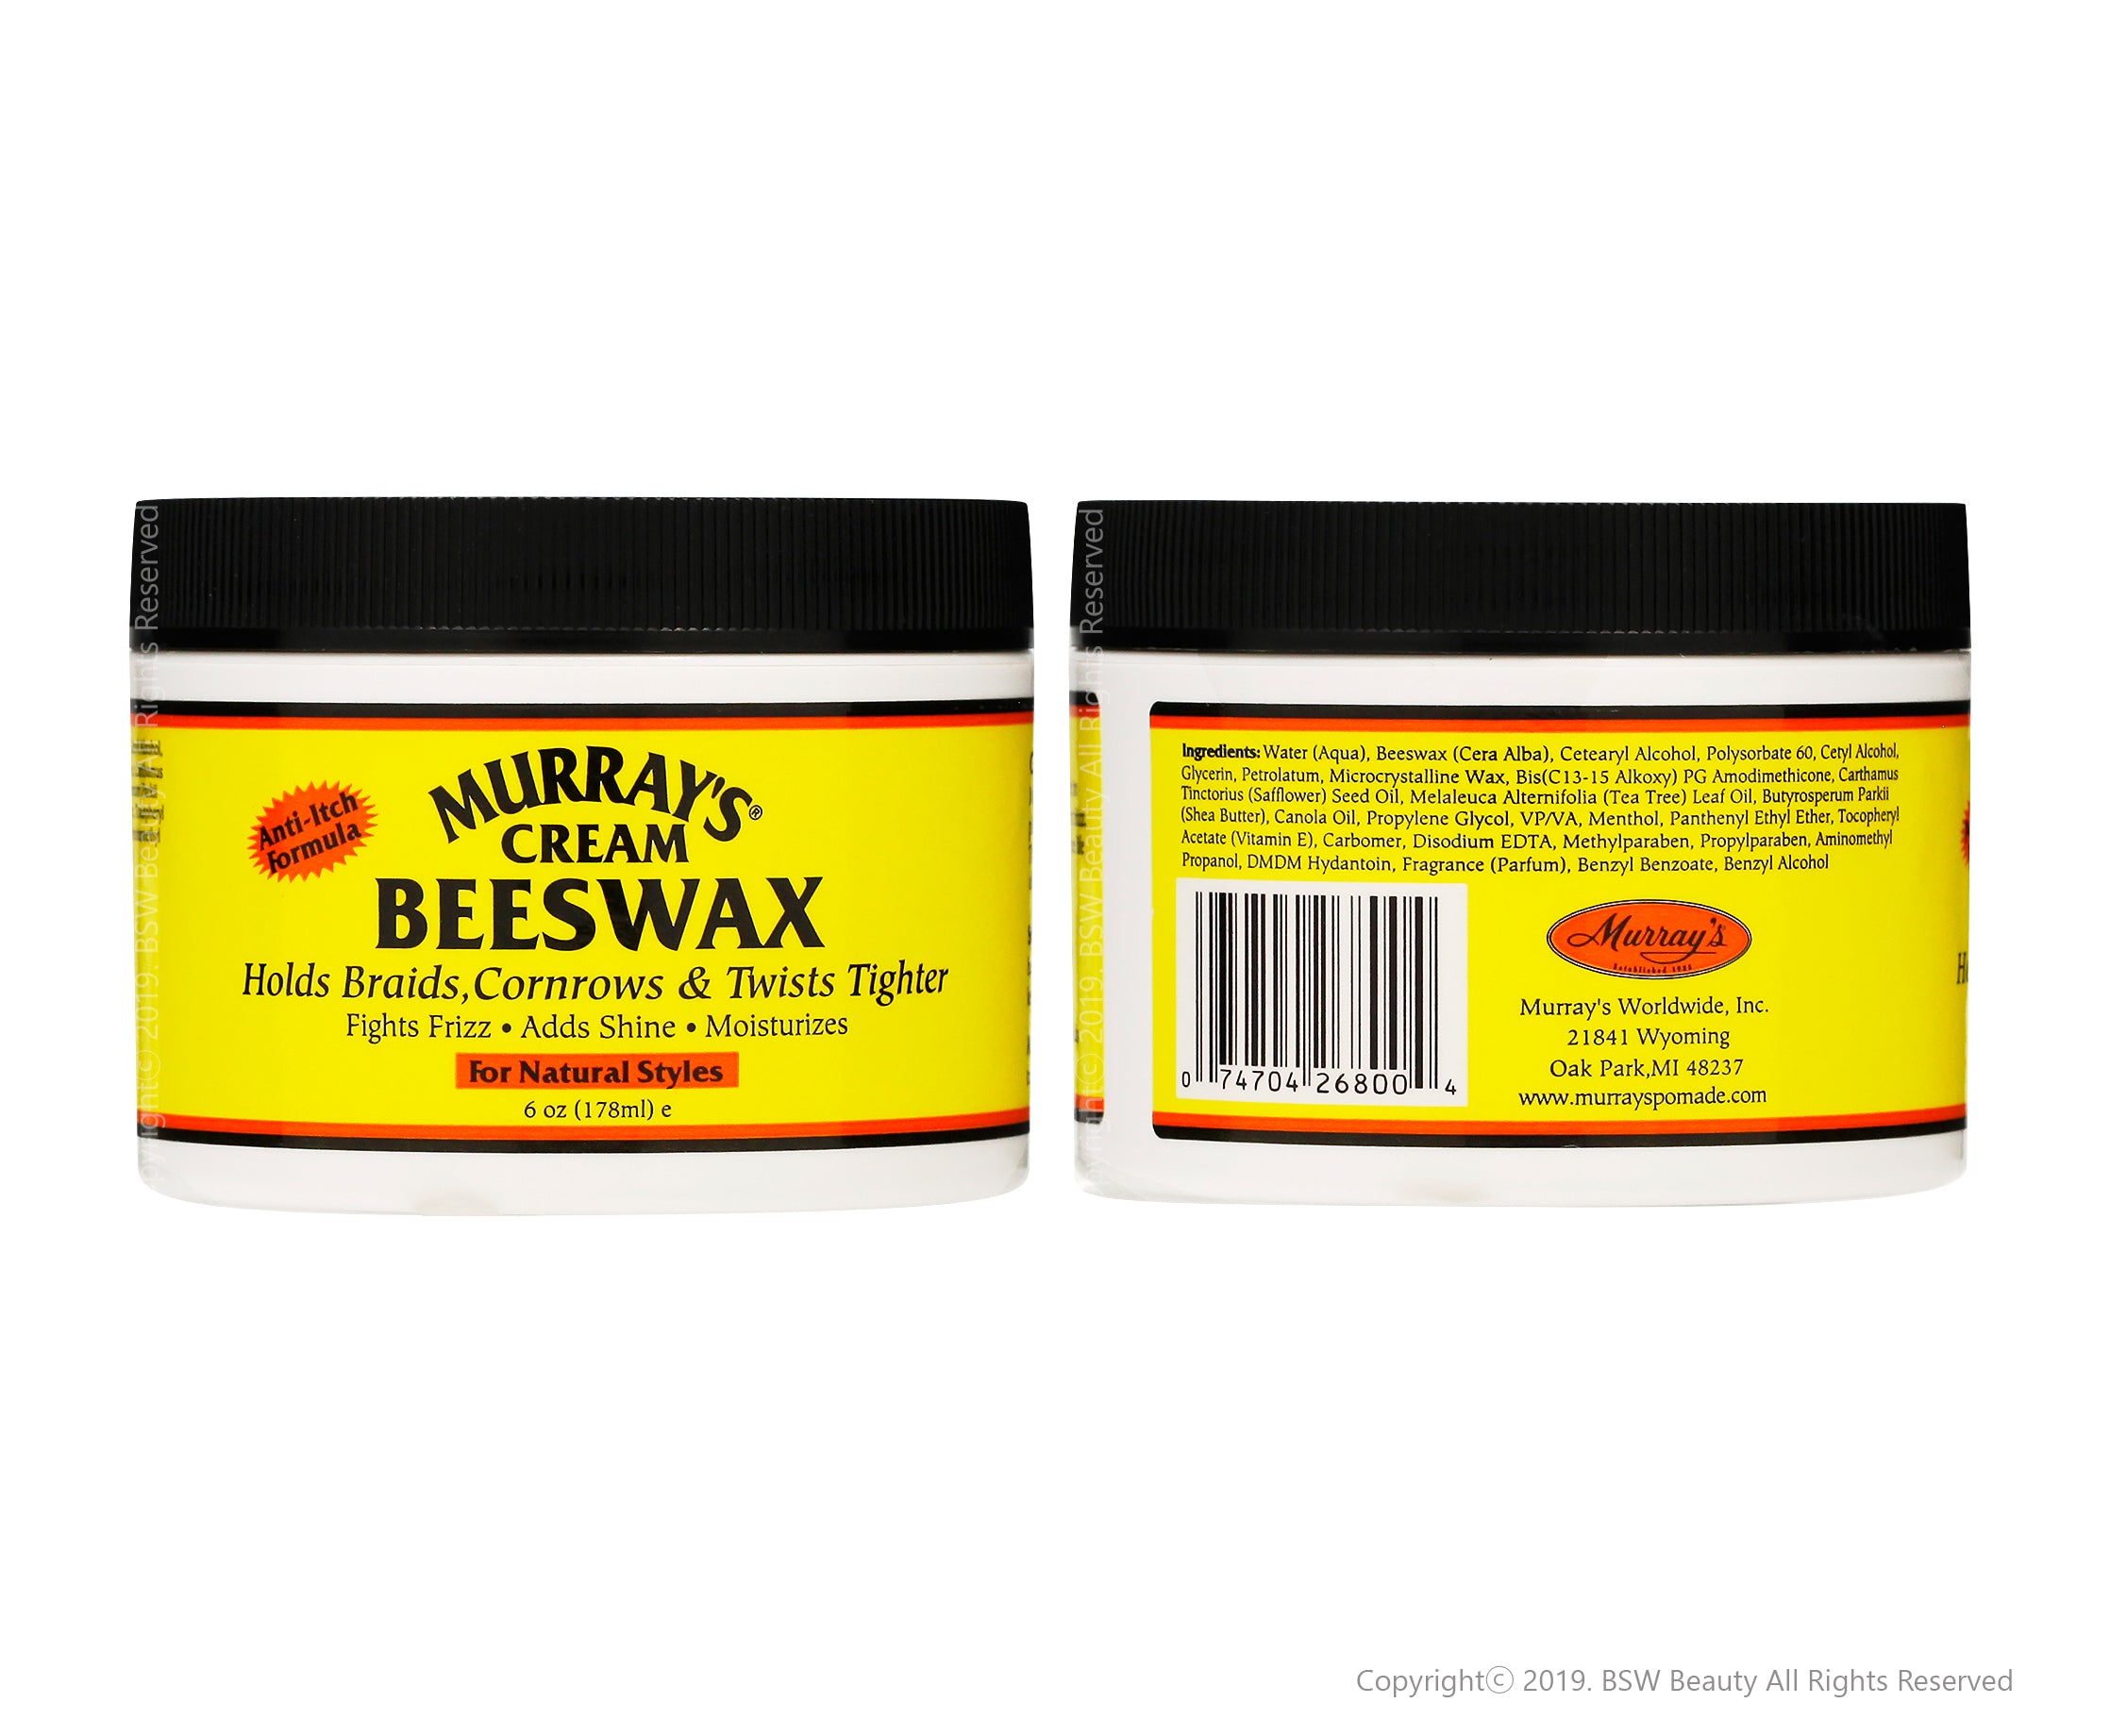 MURRAY'S CREAM BEESWAX FOR NATURAL STYLES 6oz